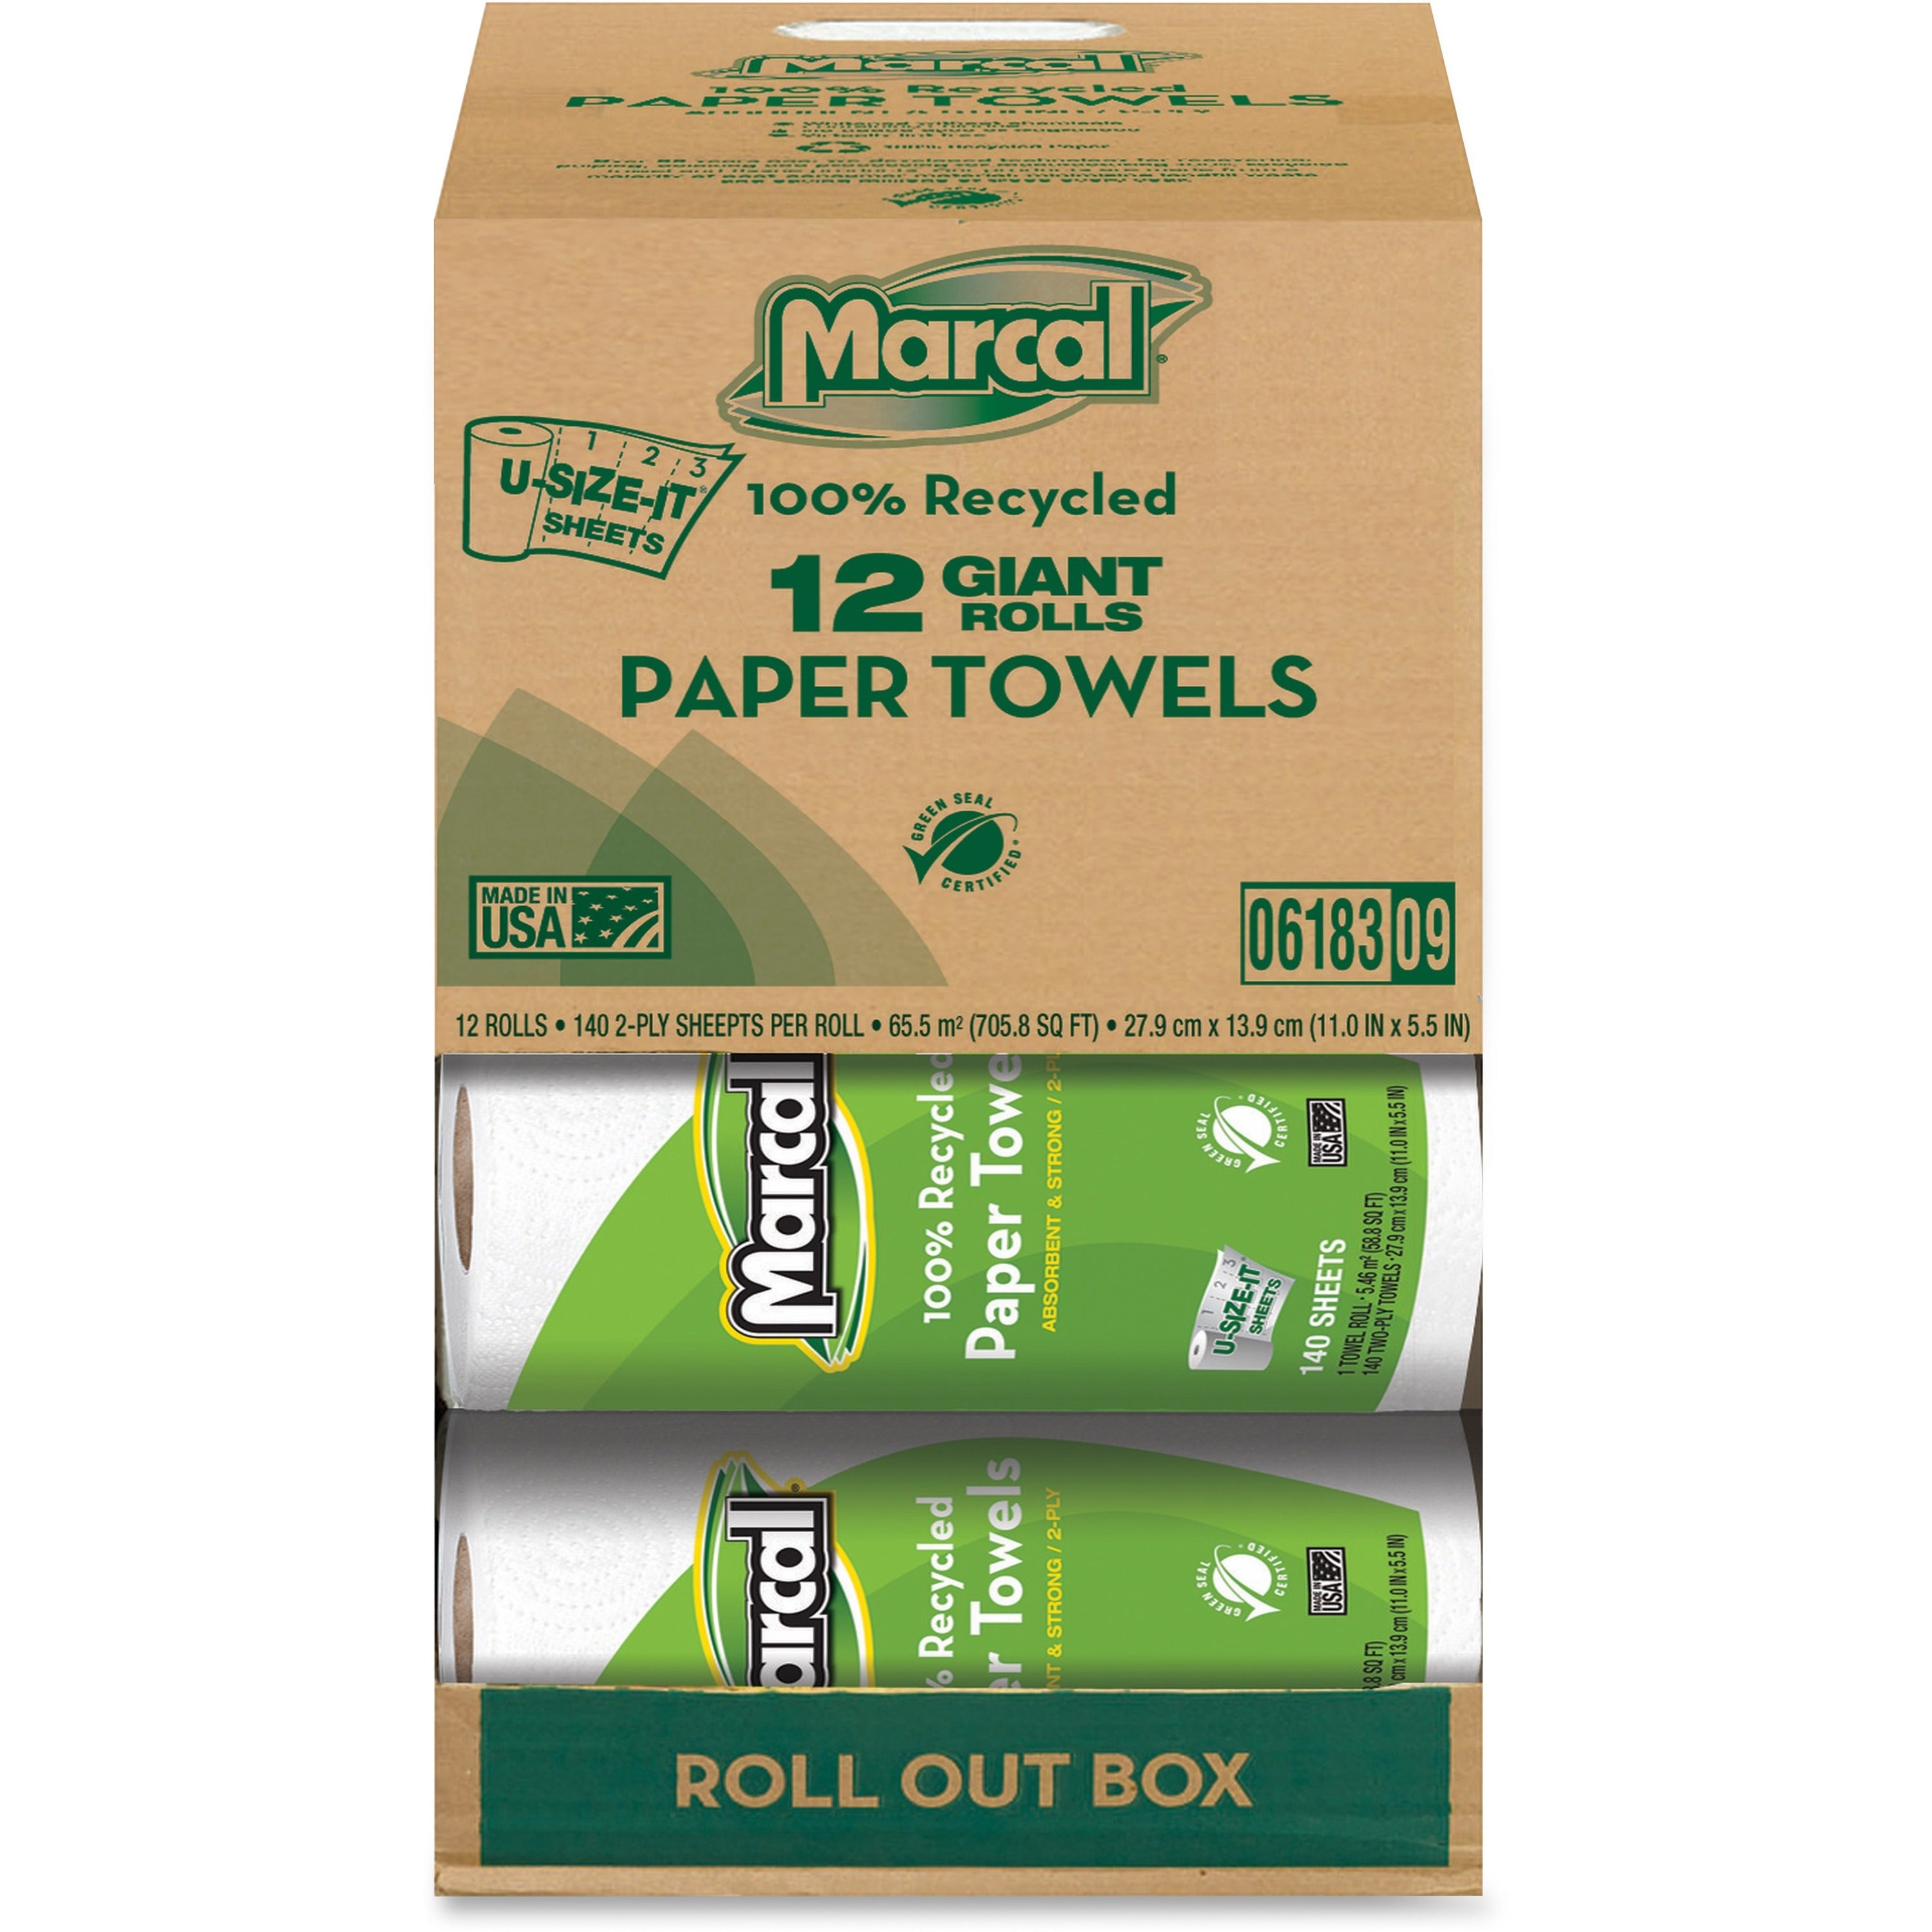 Marcal Giant Paper Towel in a Roll Out Carton - 2 Ply - 140 Sheets/Roll - White - Paper - Perforated - For Office Building, Washroom, Restroom - 12 / Carton - 